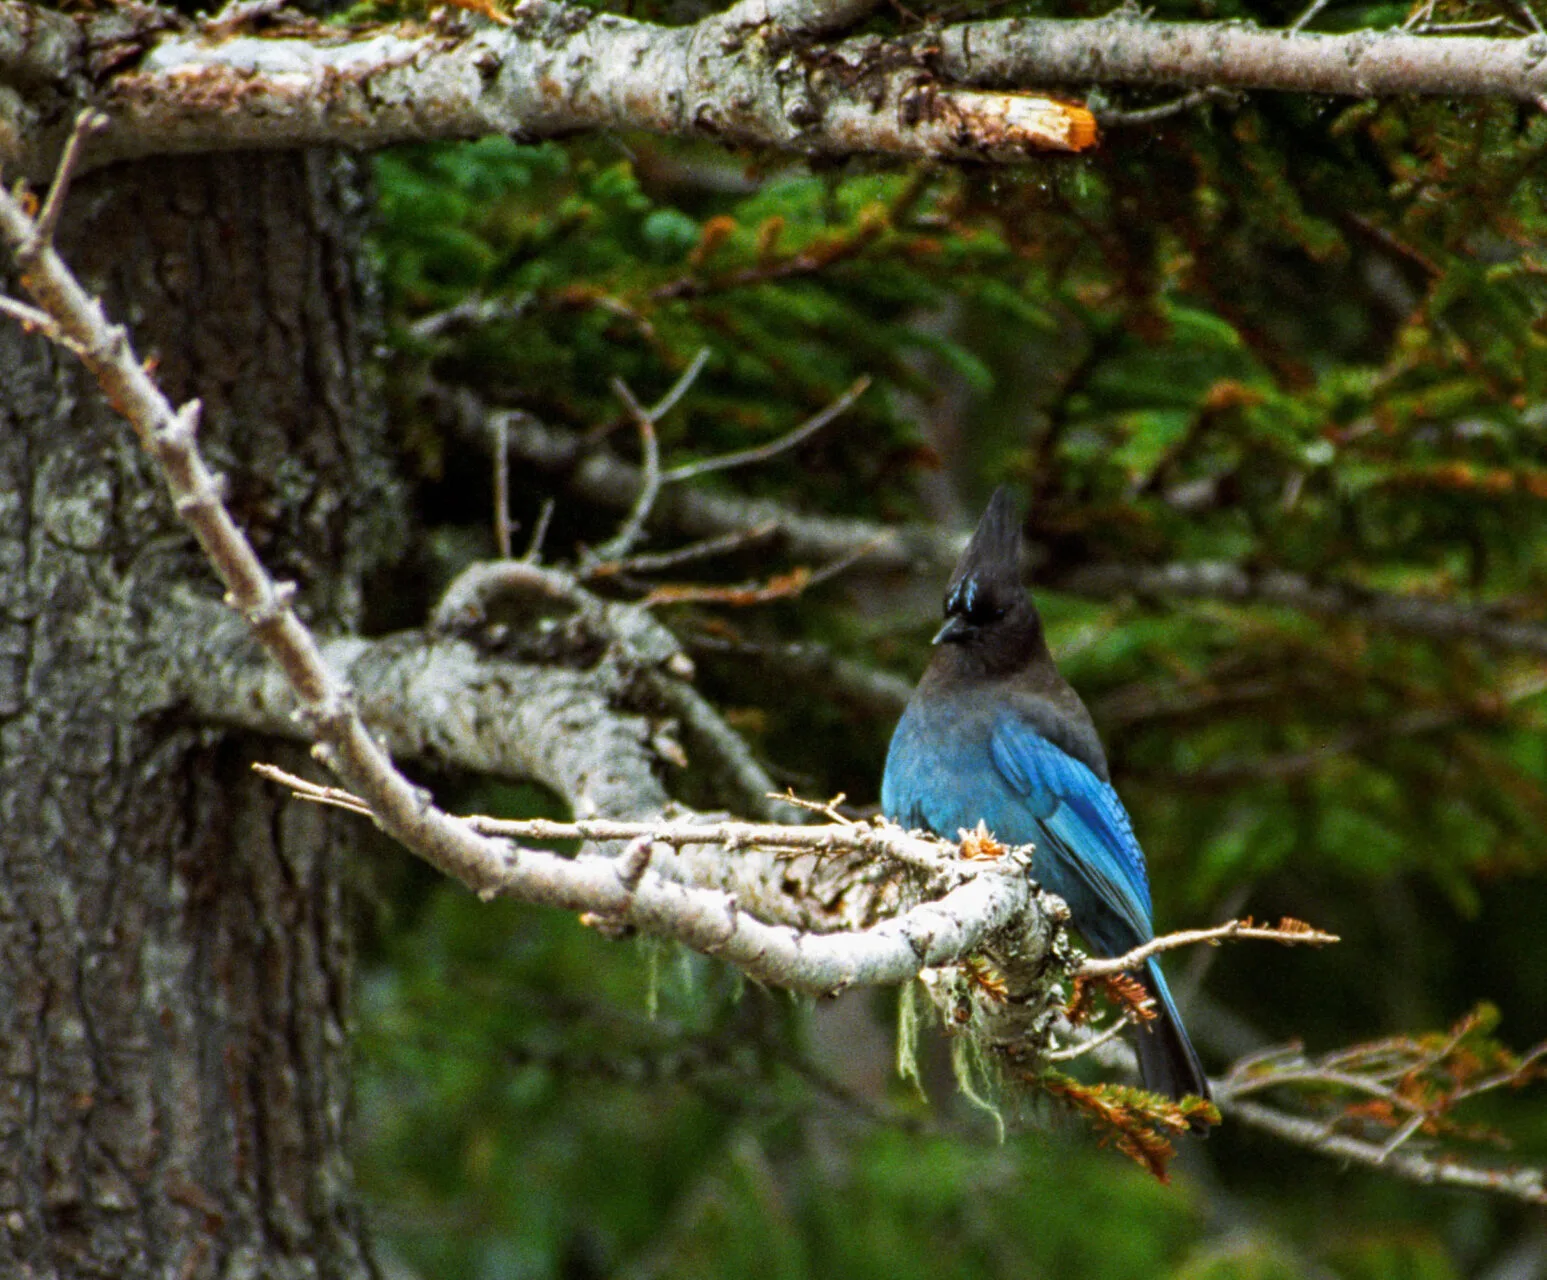 Steller's Jay showing off its blue coat in Olympic National park.